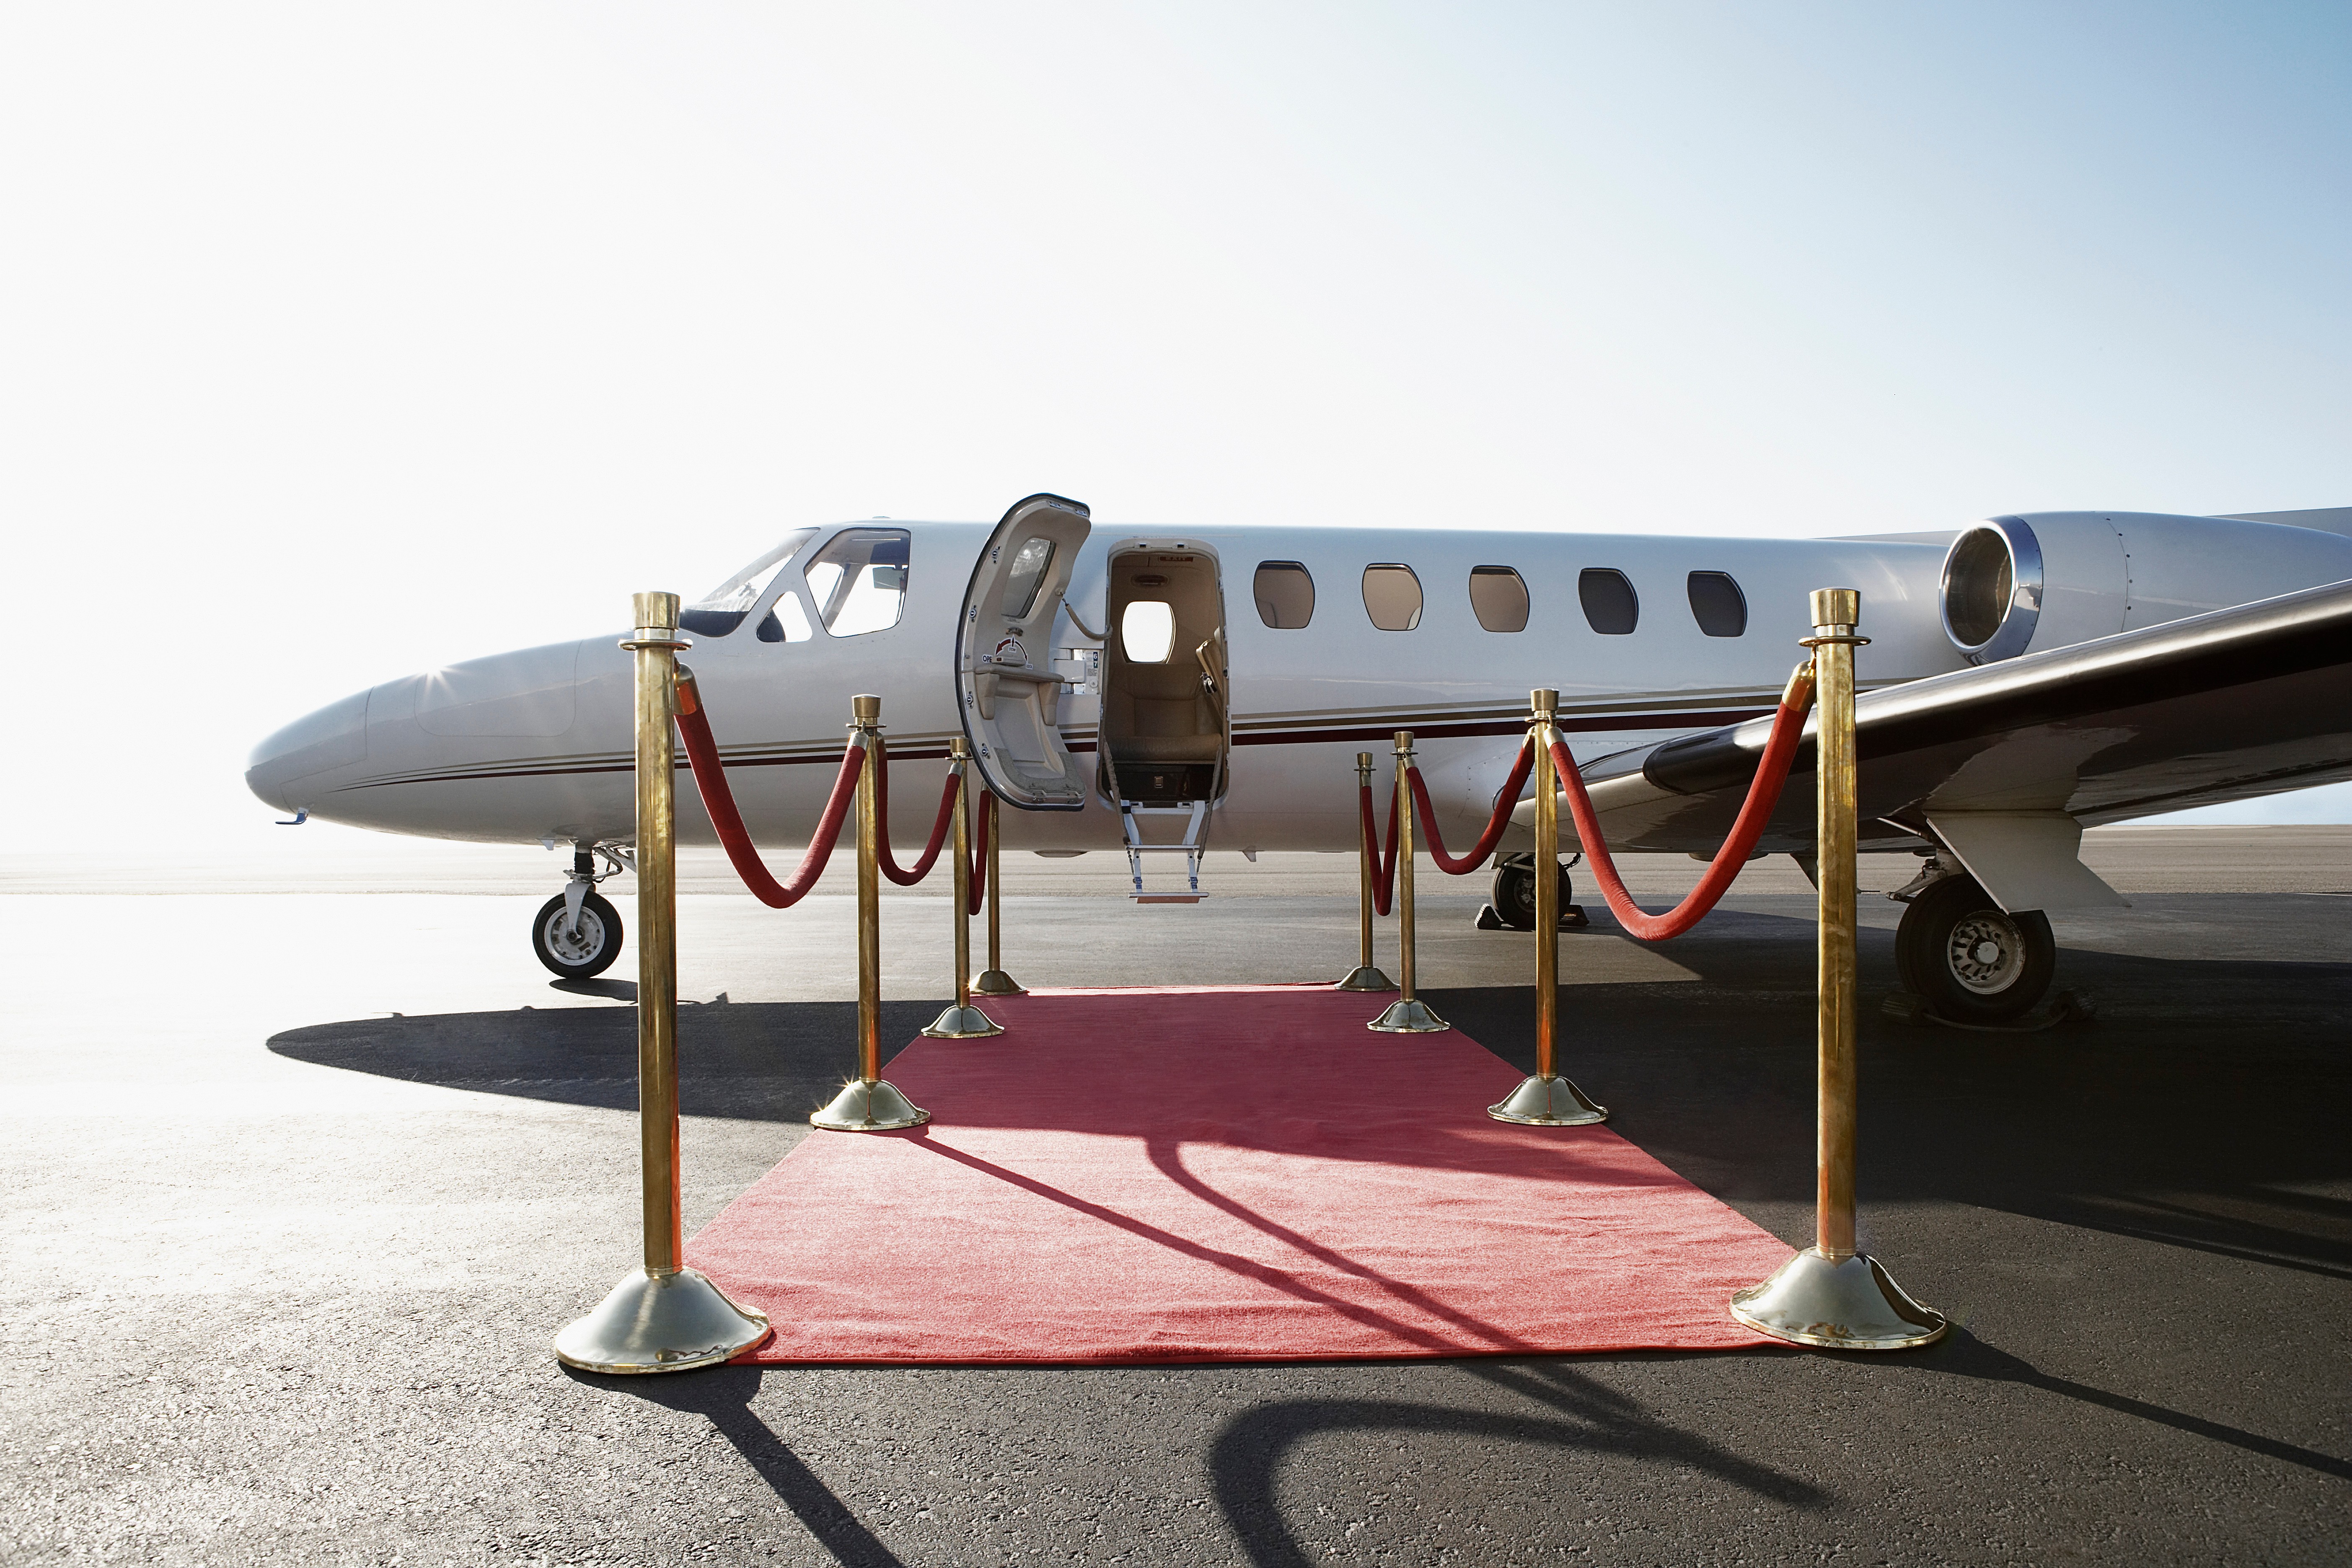 Don't ban private jets — make them a green testing ground